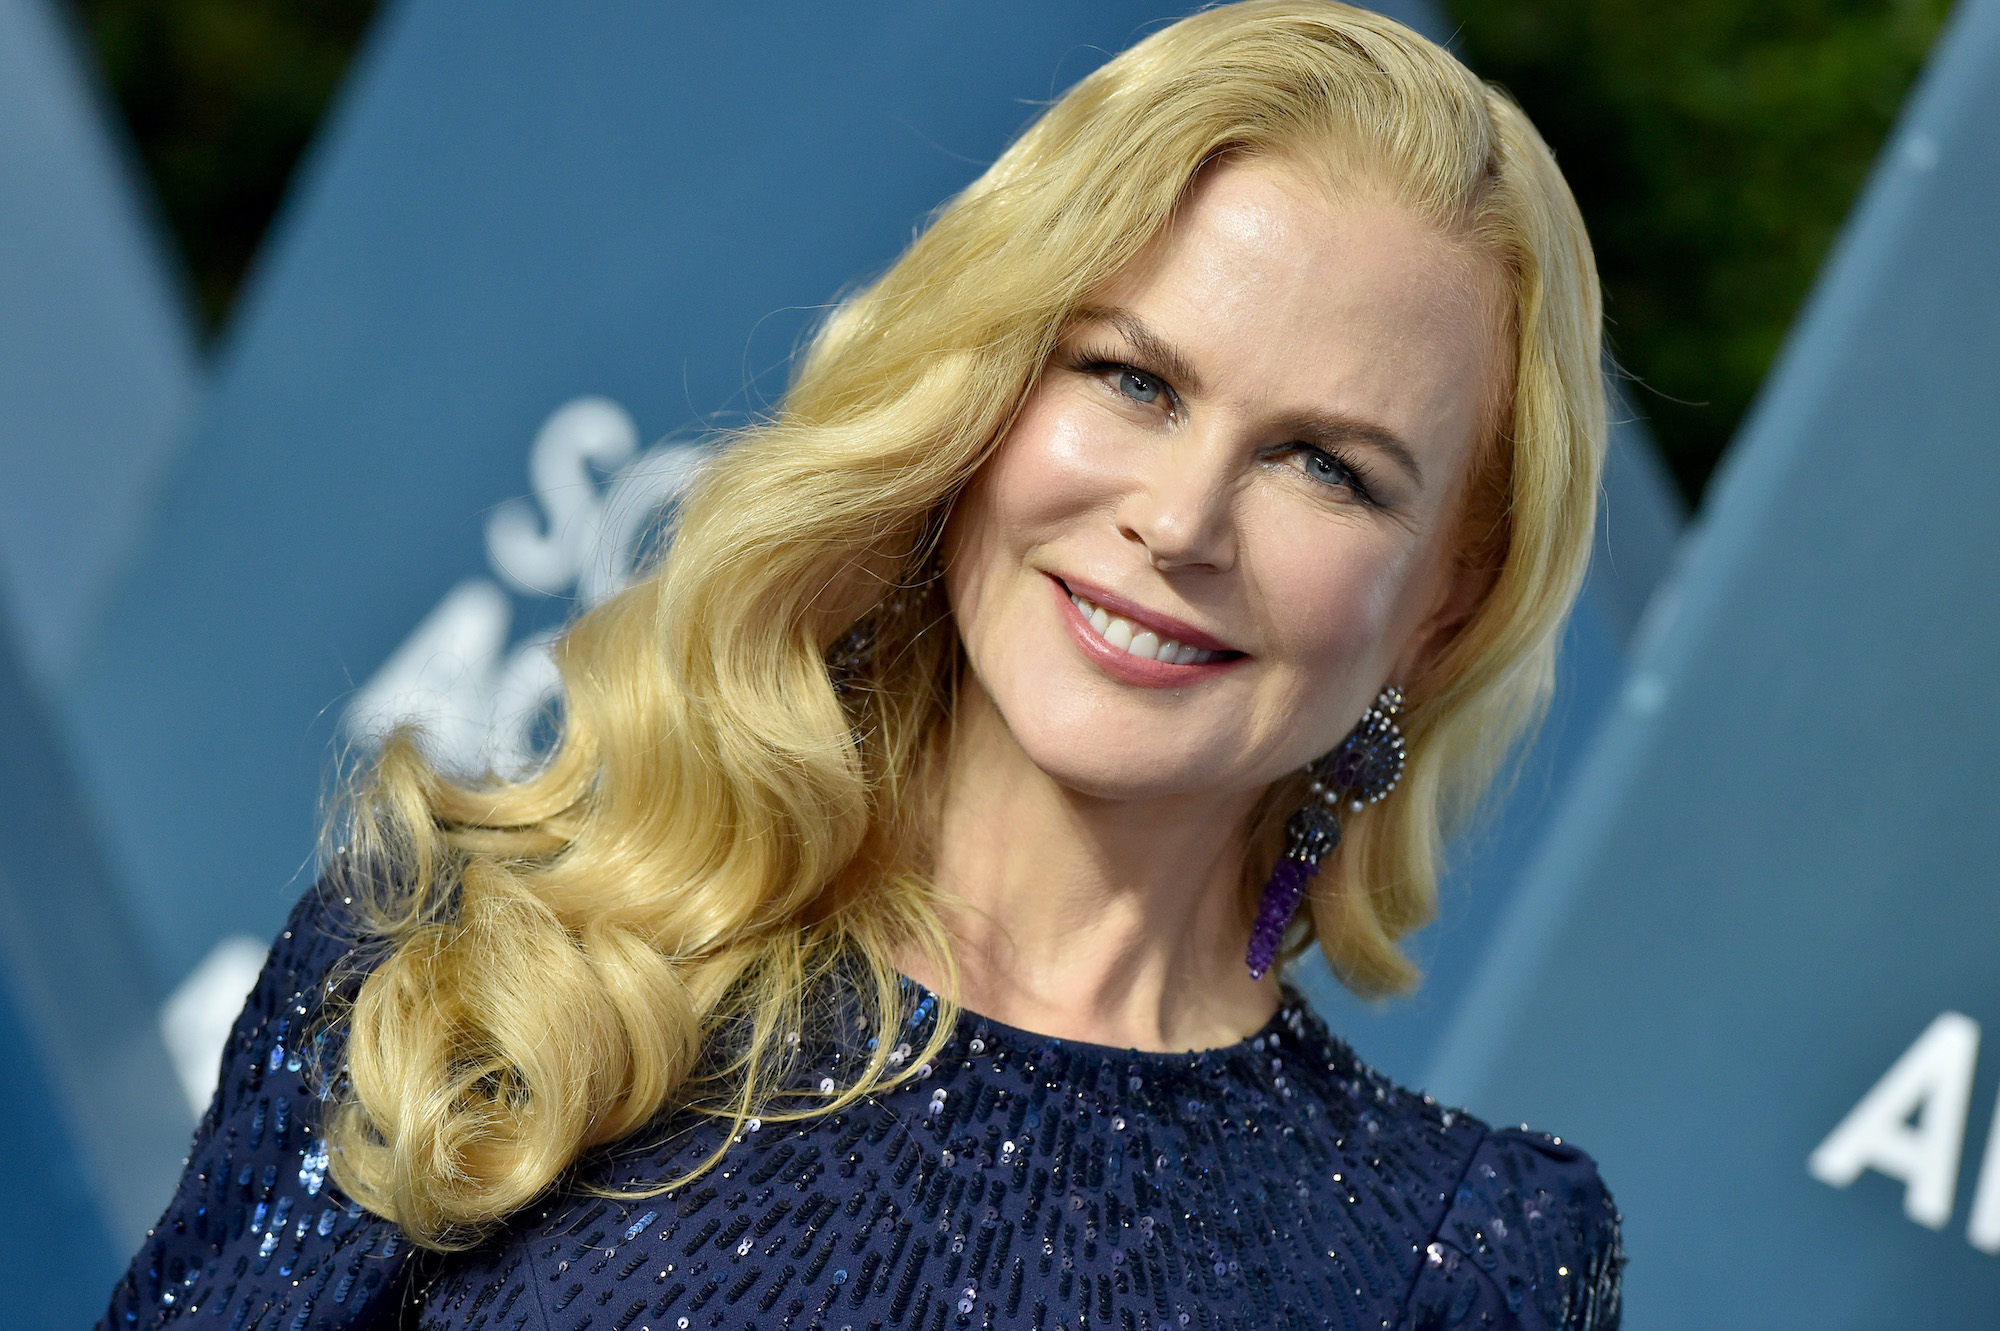 Nicole Kidman smiling in front of a blue background